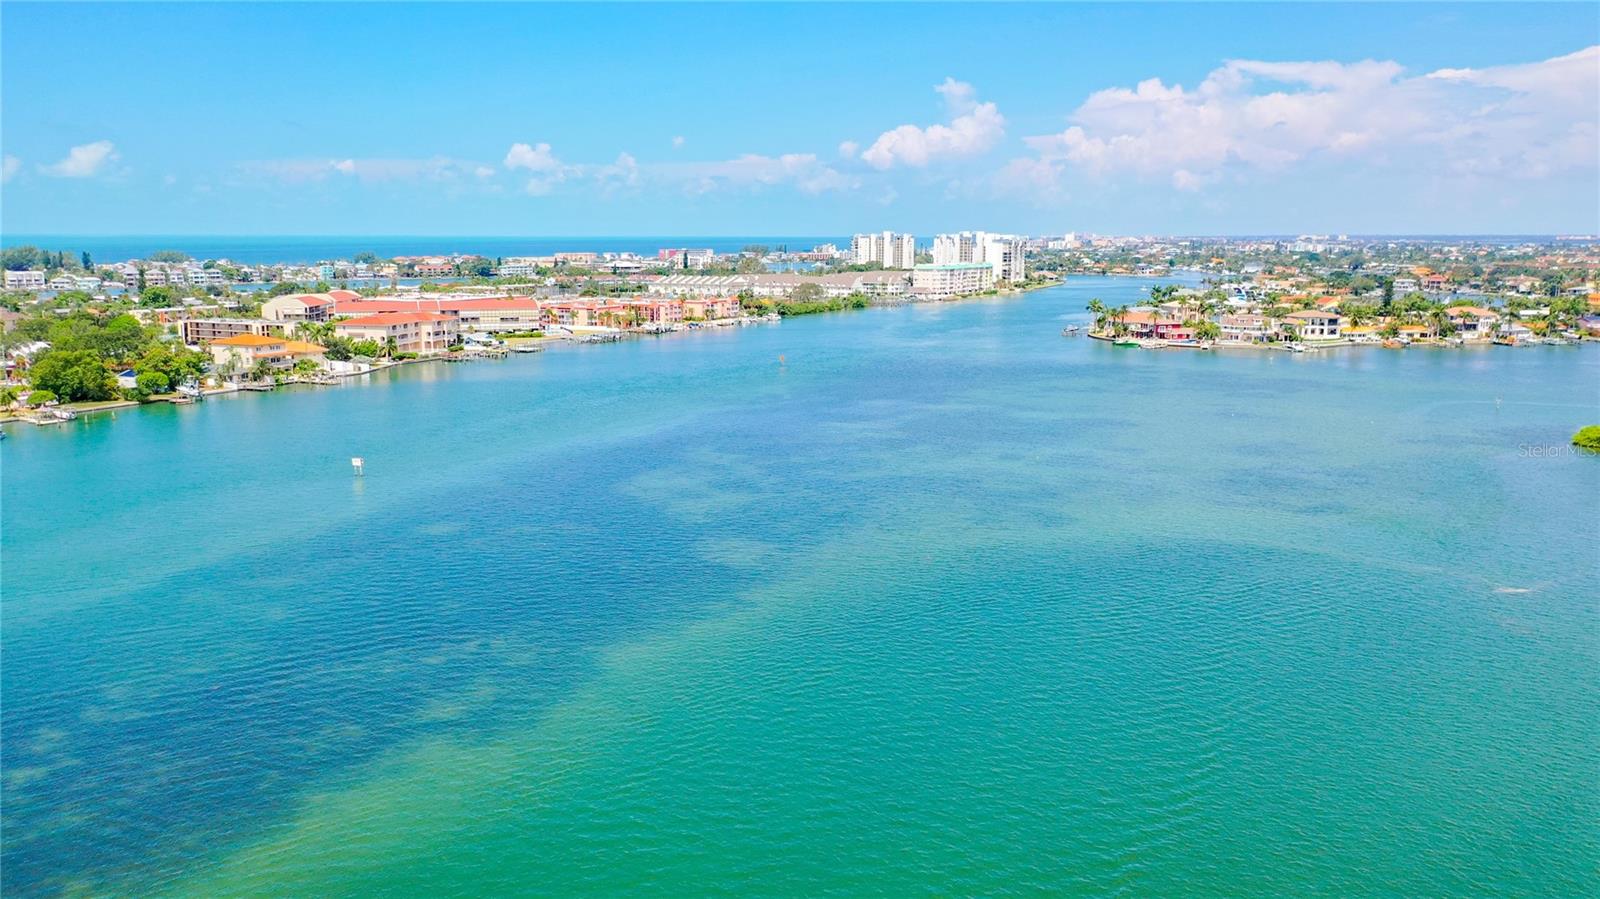 Stunning aerial view from Harbourside looking down the Intracoastal waterway